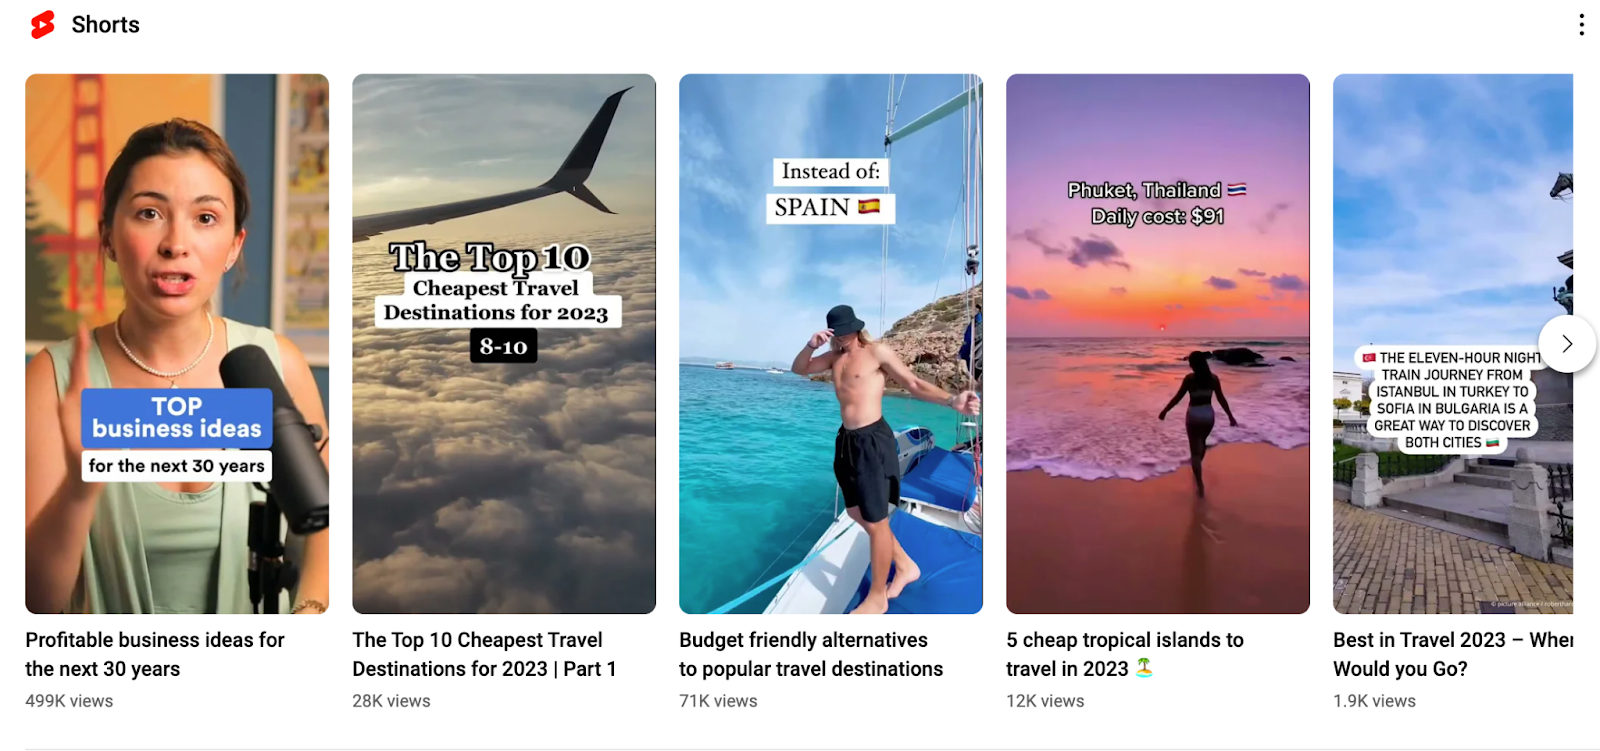 A screenshot of the Shorts section on YouTube featuring different travel video content